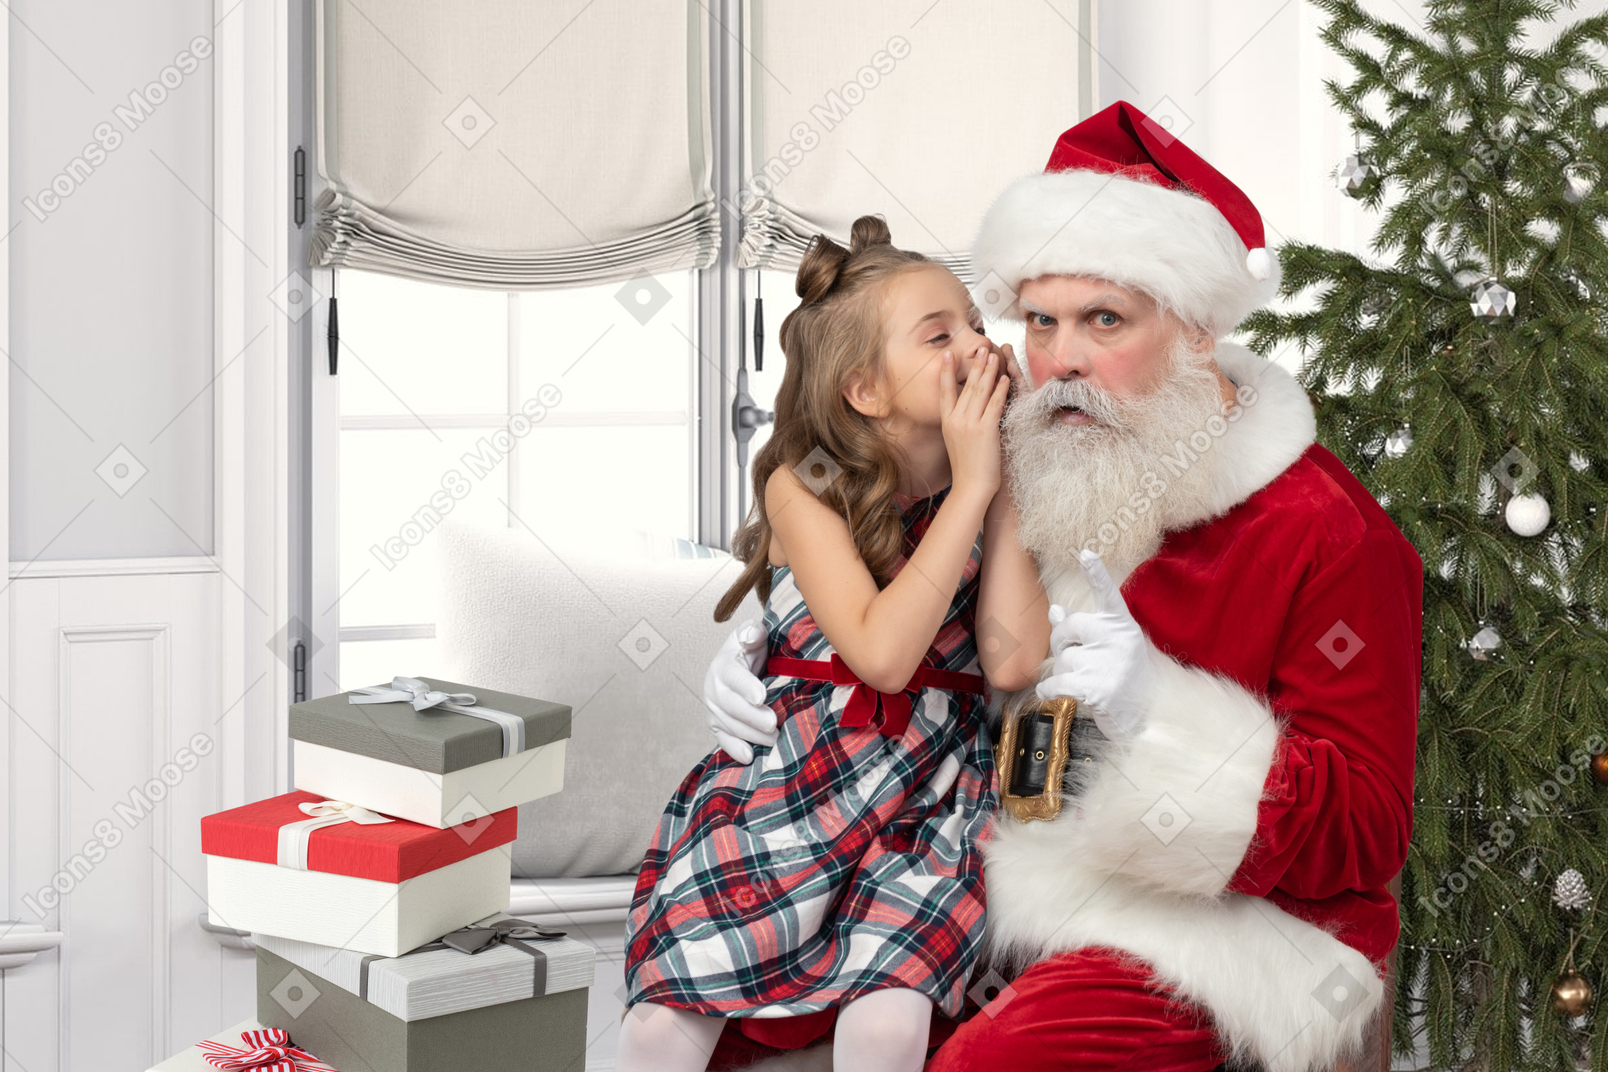 Santa claus and a little girl